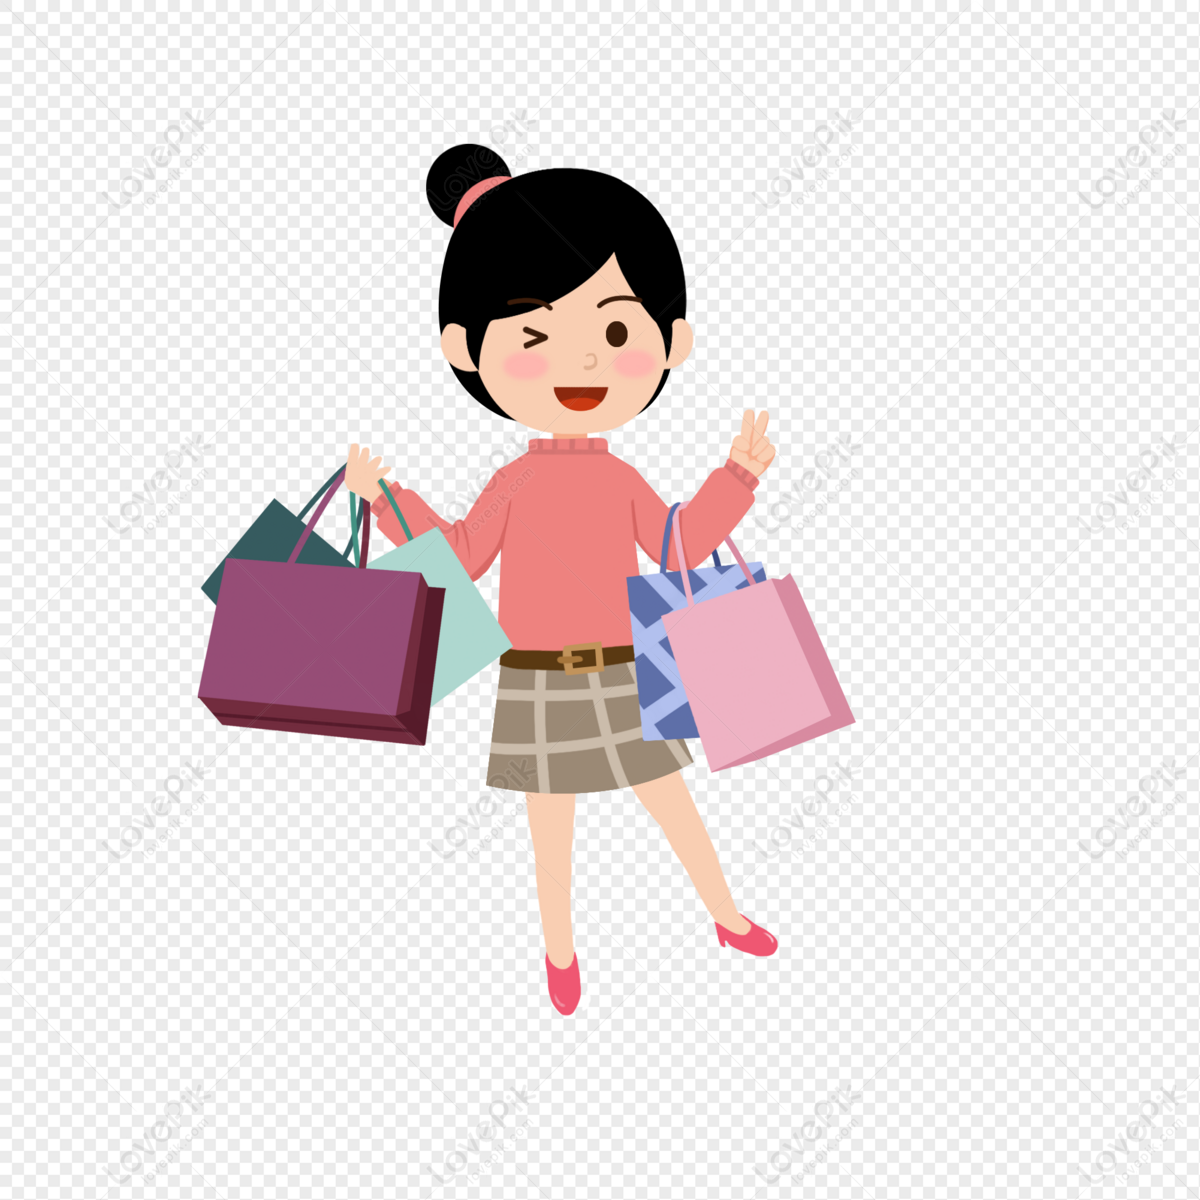 Double 11 Shopping Cartoon Elements PNG Image Free Download And Clipart  Image For Free Download - Lovepik | 402016571